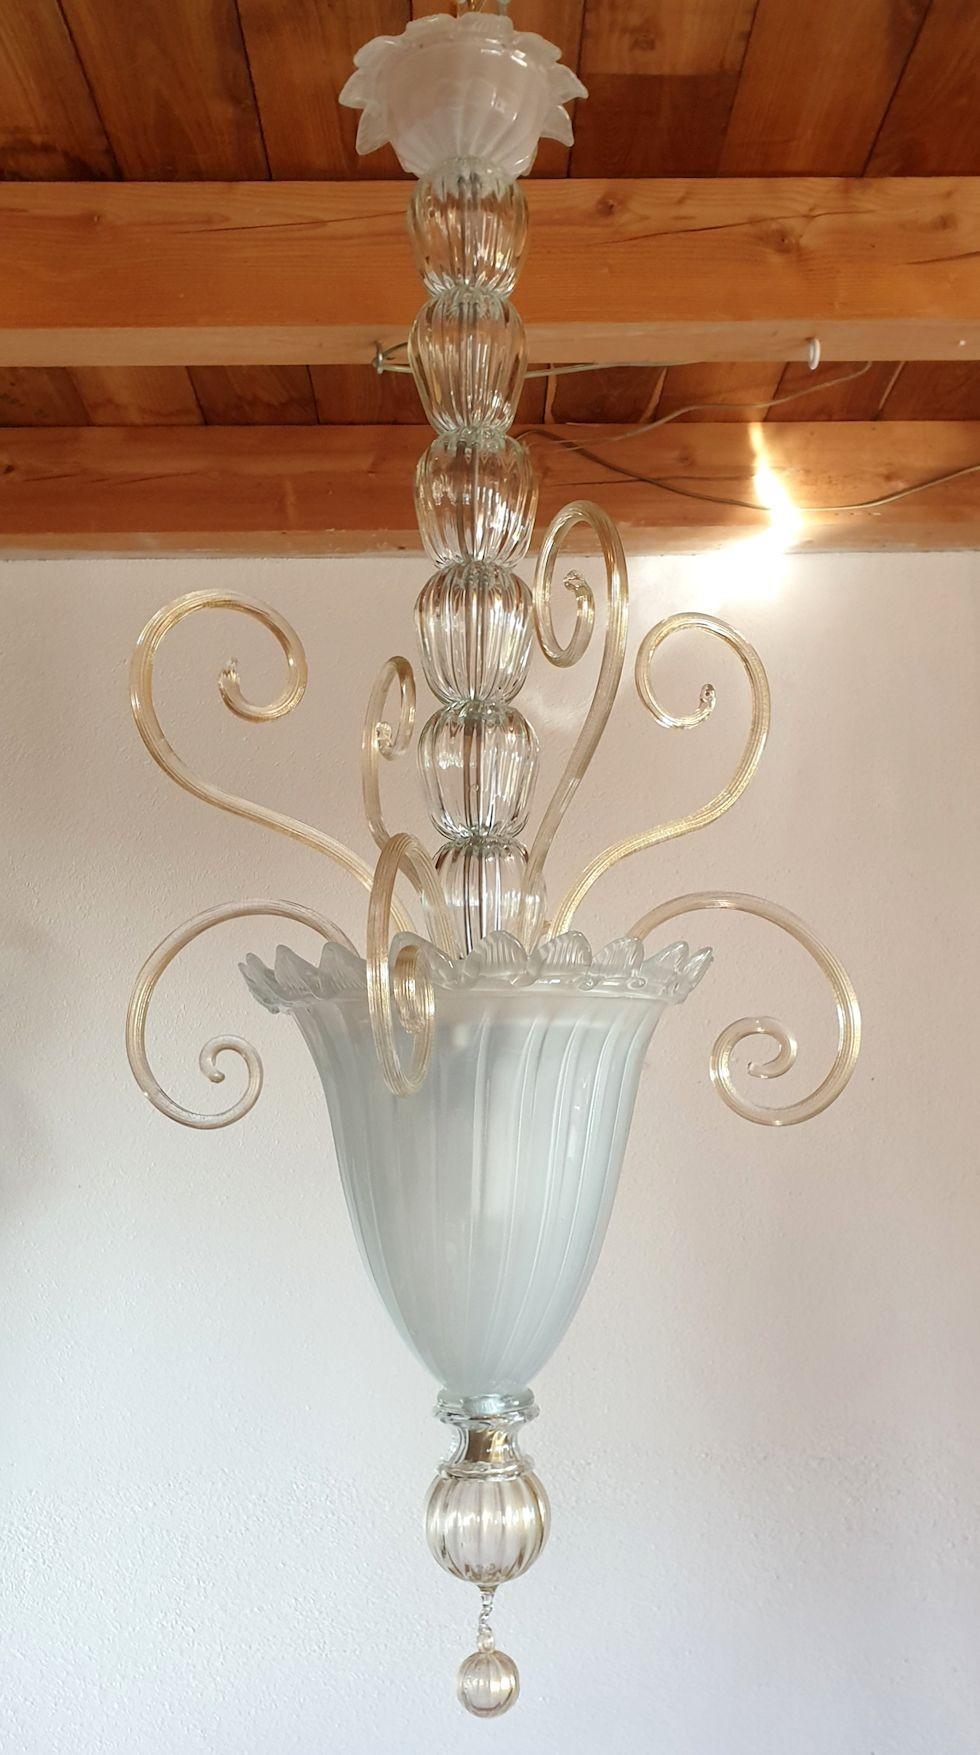 Tall Neoclassical Murano glass lantern or chandelier, attributed to Venini, Italy 1960s.
The Mid-Century Modern lantern is made of a frosted translucent Murano glass bottom vase, nesting 3 lights and clear and gold leaf ornaments.
The Italian